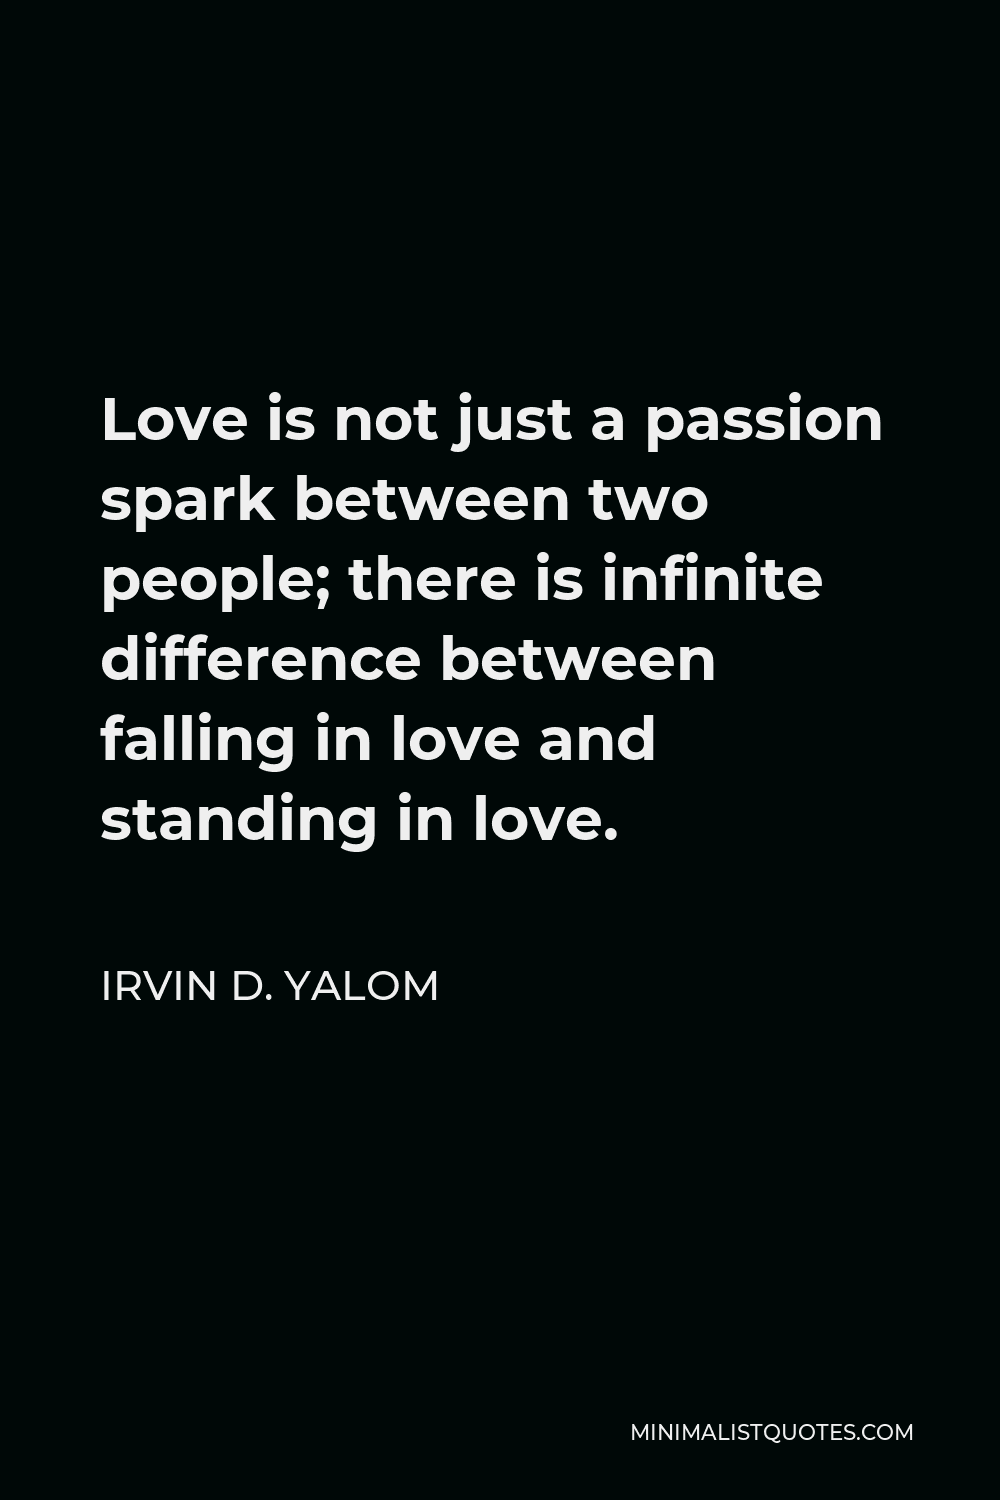 Irvin D. Yalom Quote - Love is not just a passion spark between two people; there is infinite difference between falling in love and standing in love.